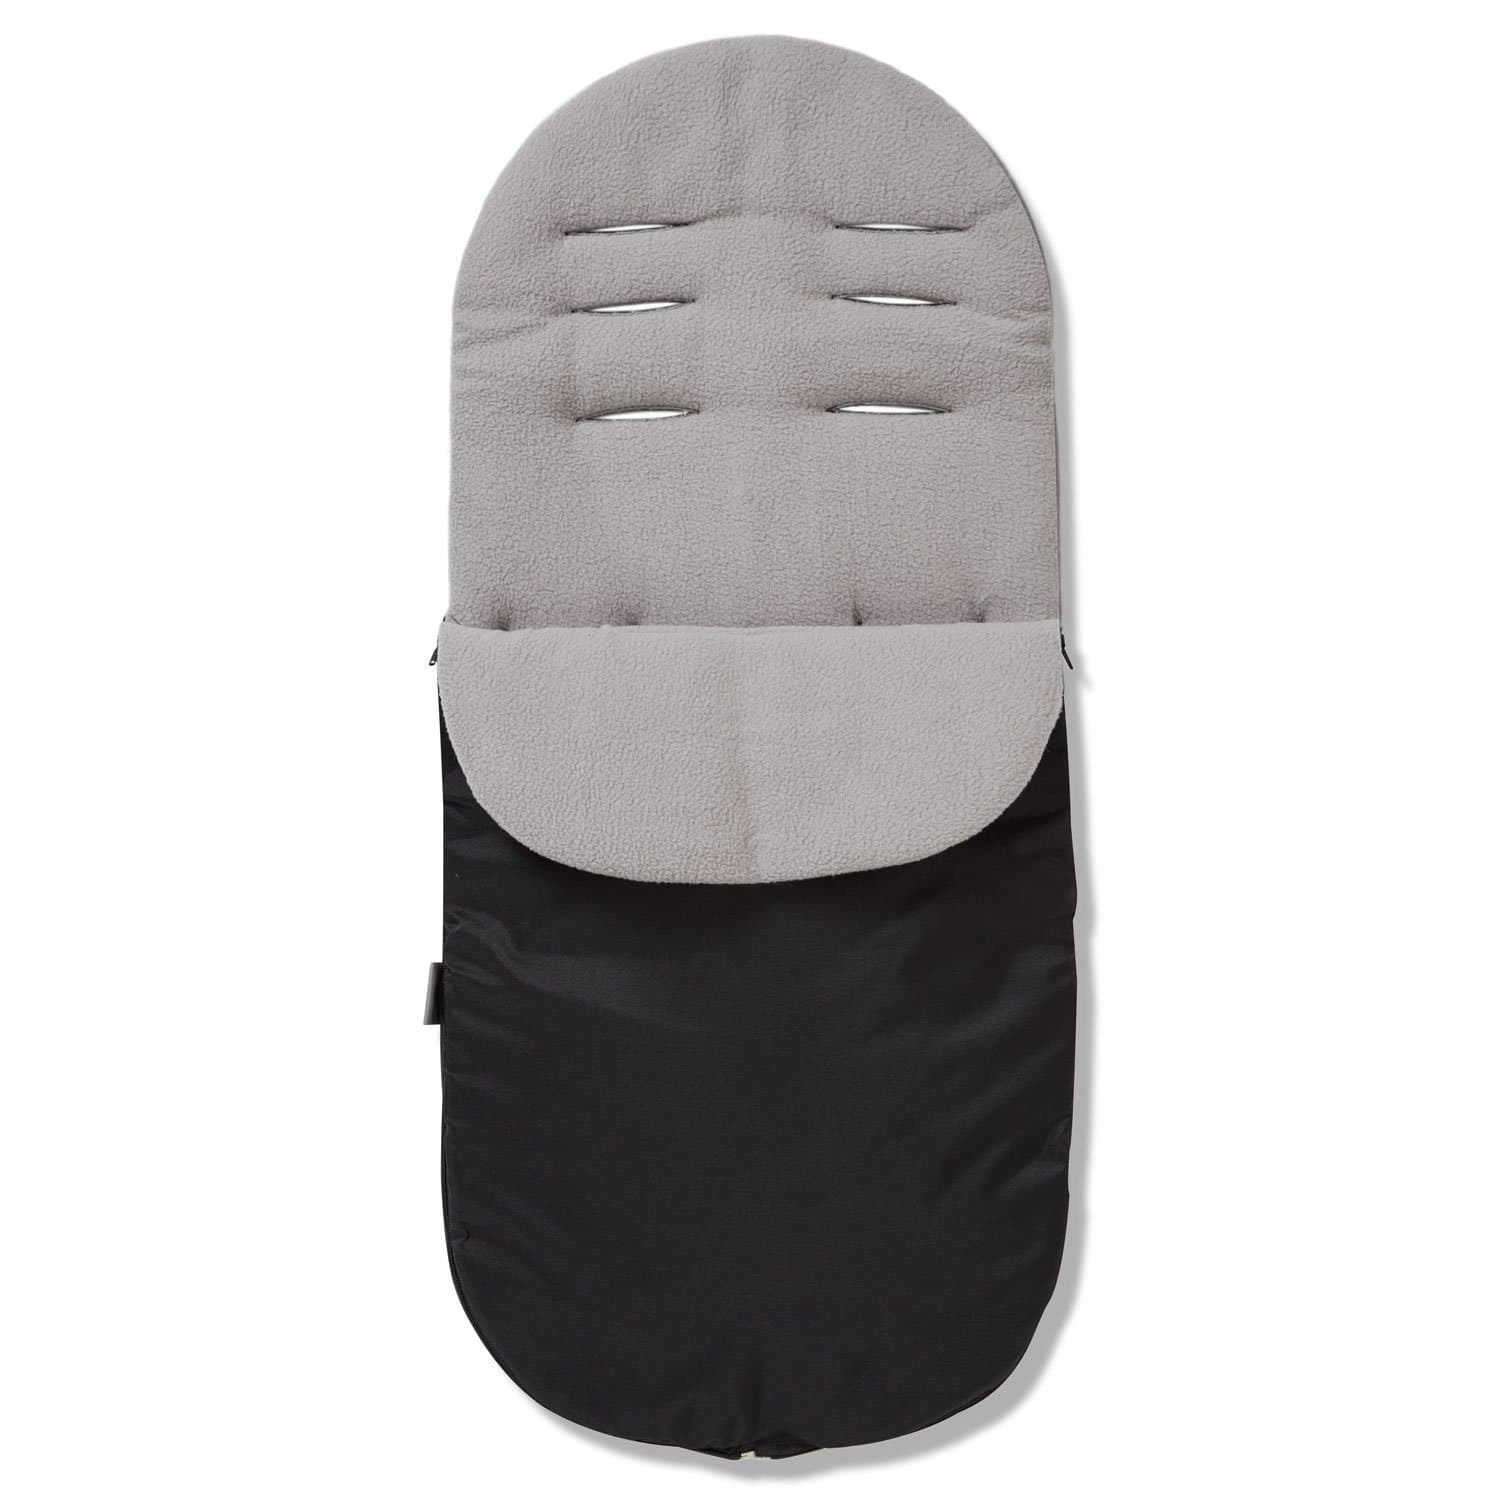 Footmuff / Cosy Toes Compatible with BabiesRus - Grey / Fits All Models | For Your Little One